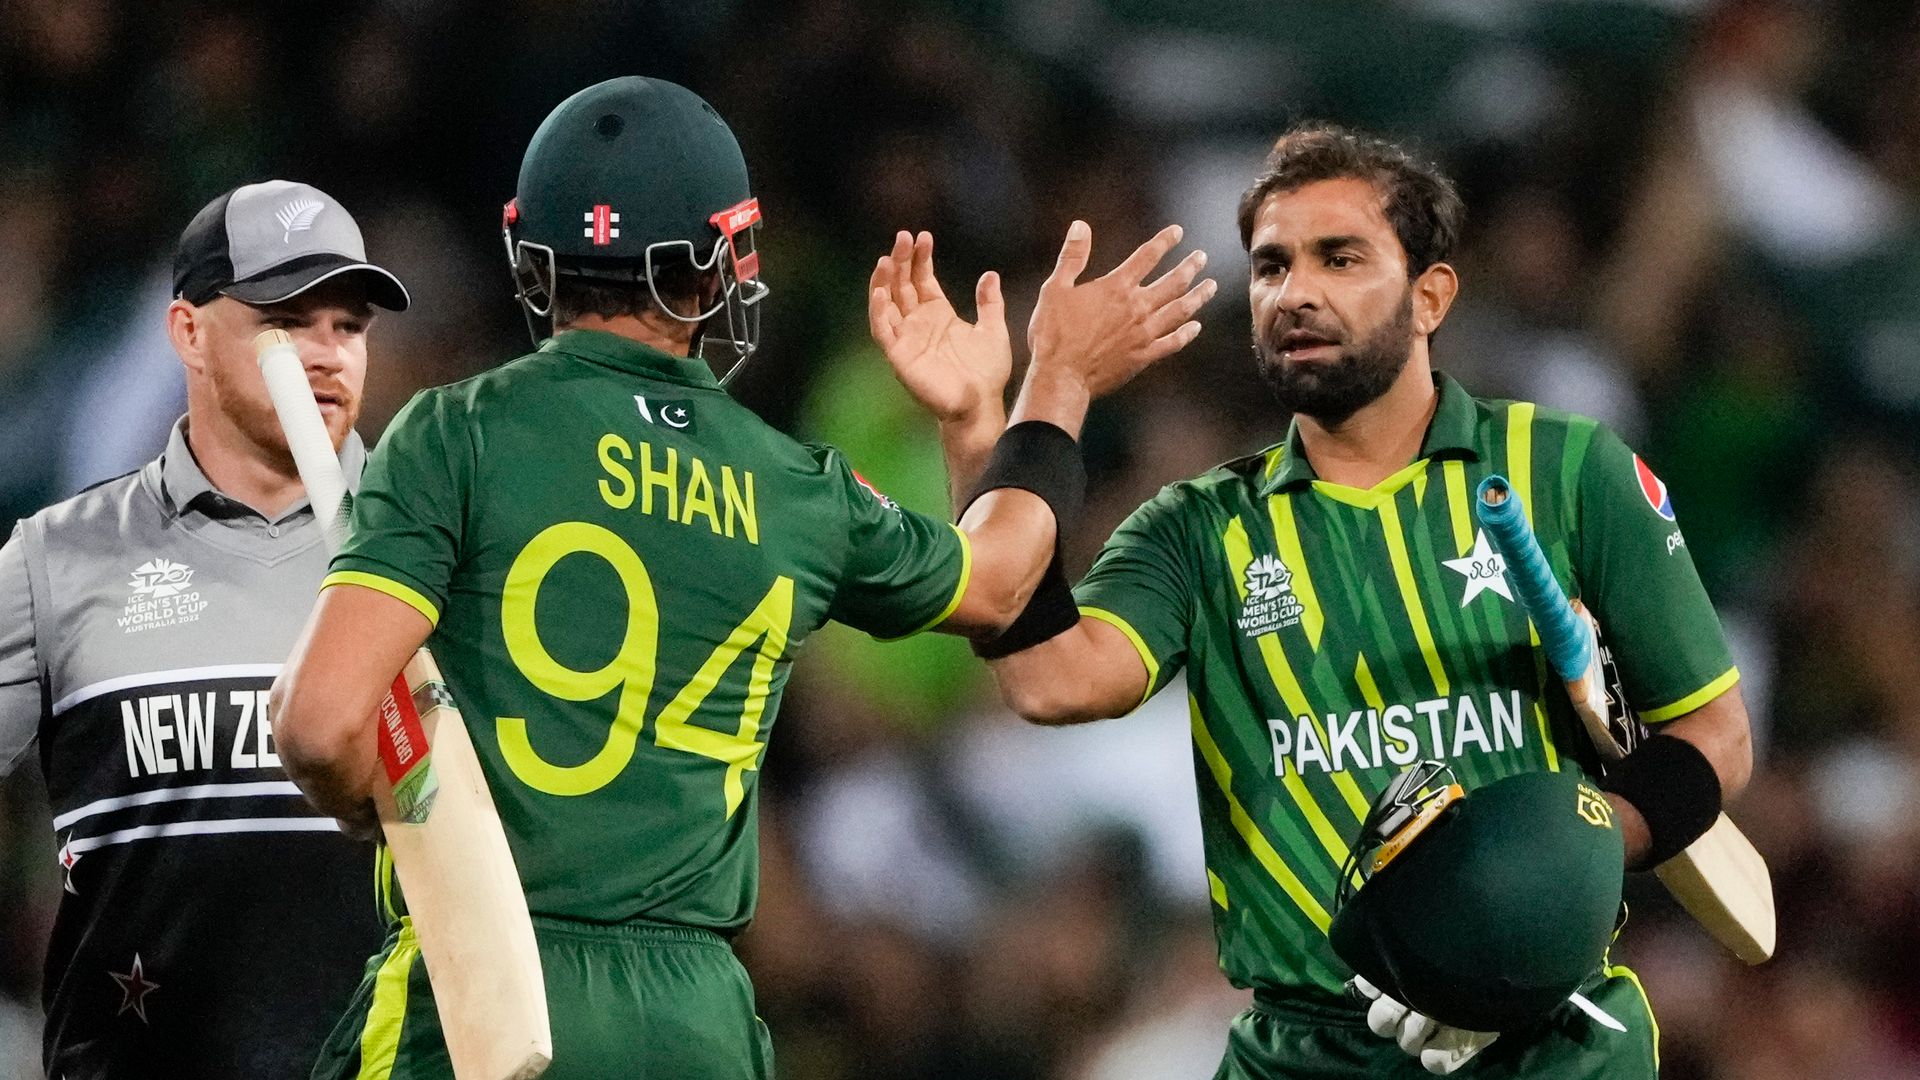 Highlights: Pakistan dominate New Zealand to reach first WC final in 13 years